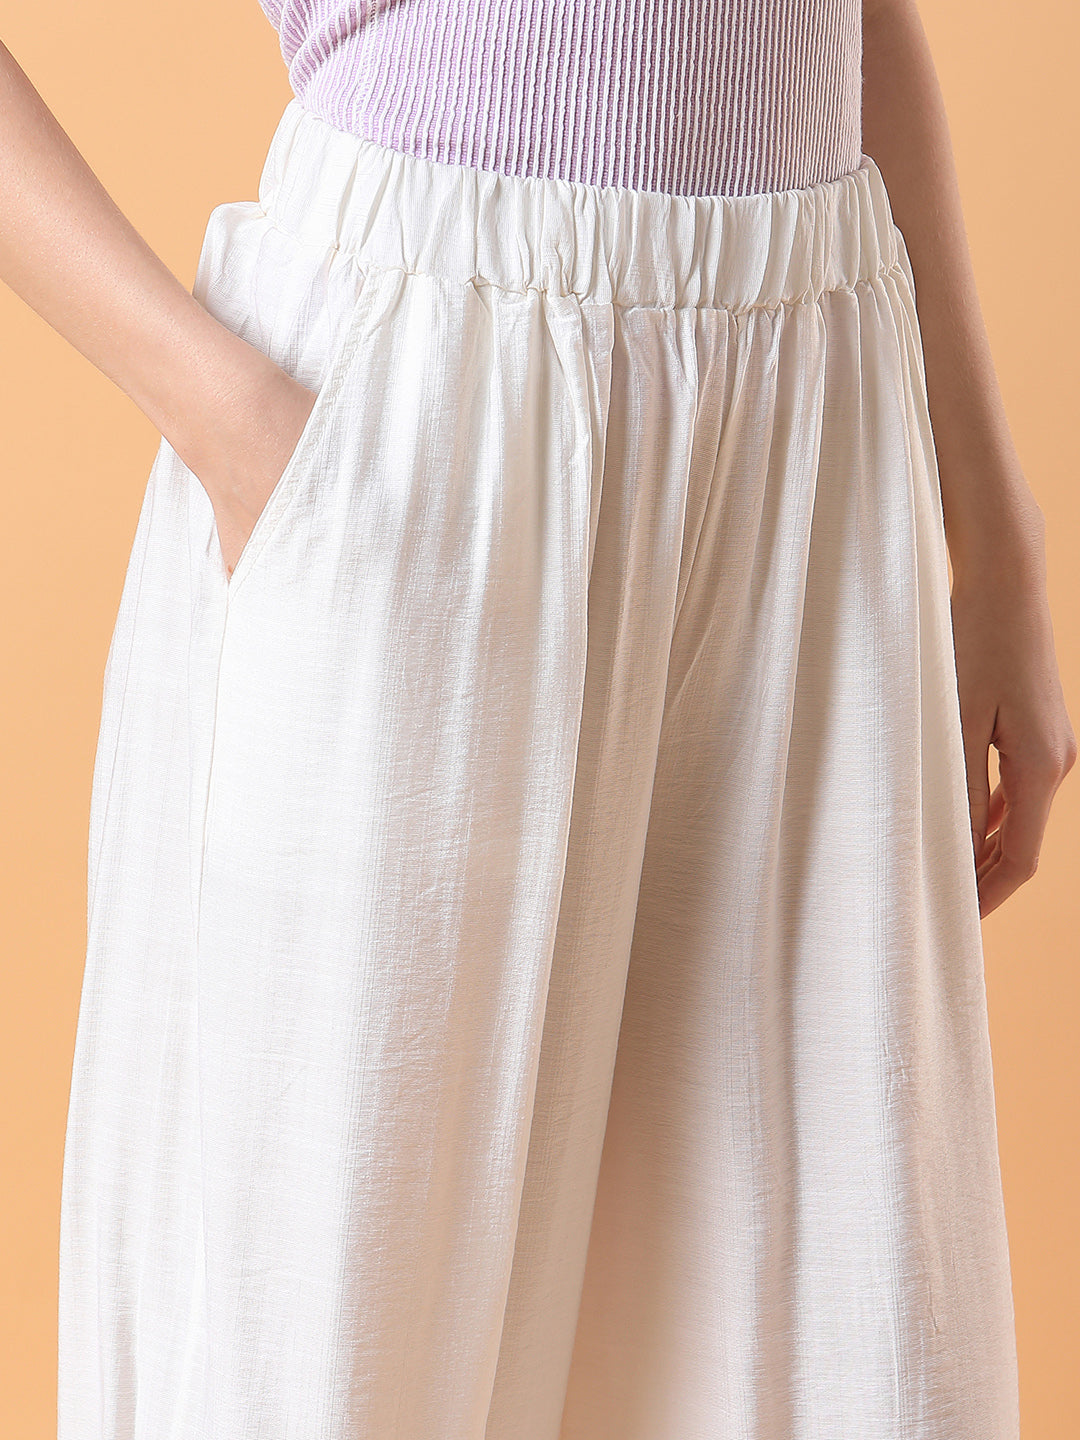 Women Solid Off White Pleated Loose Fit Trouser